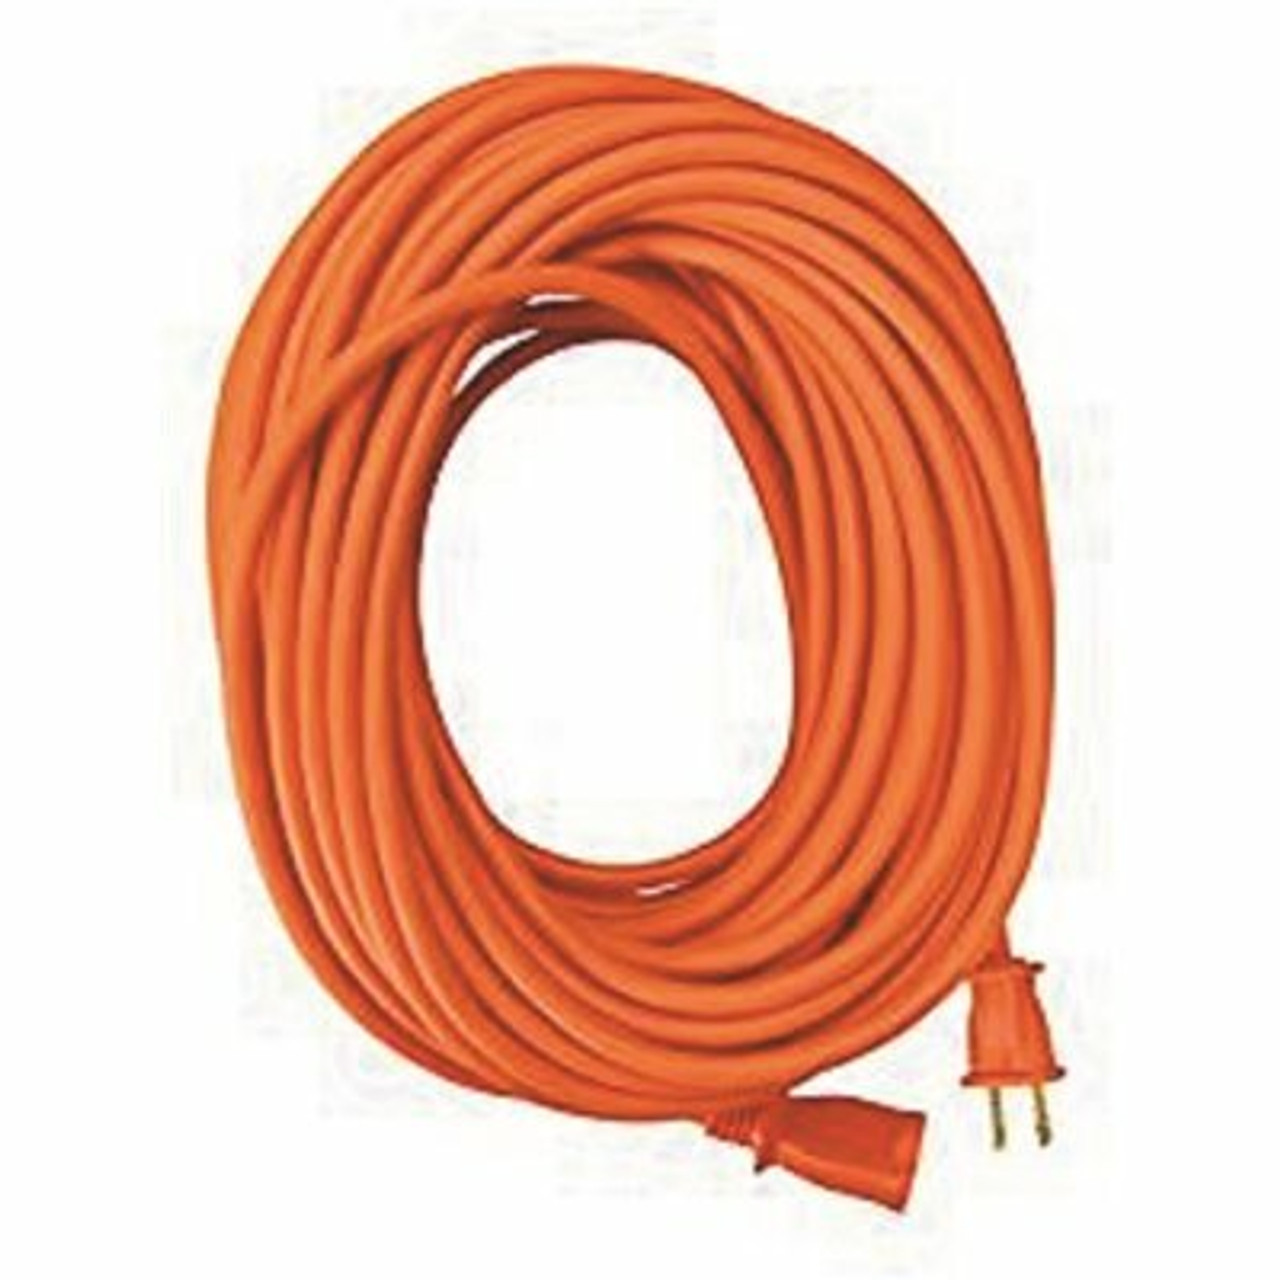 Southwire 100 Ft. 16/2 Sjtw Outdoor Light-Duty Extension Cord, Orange